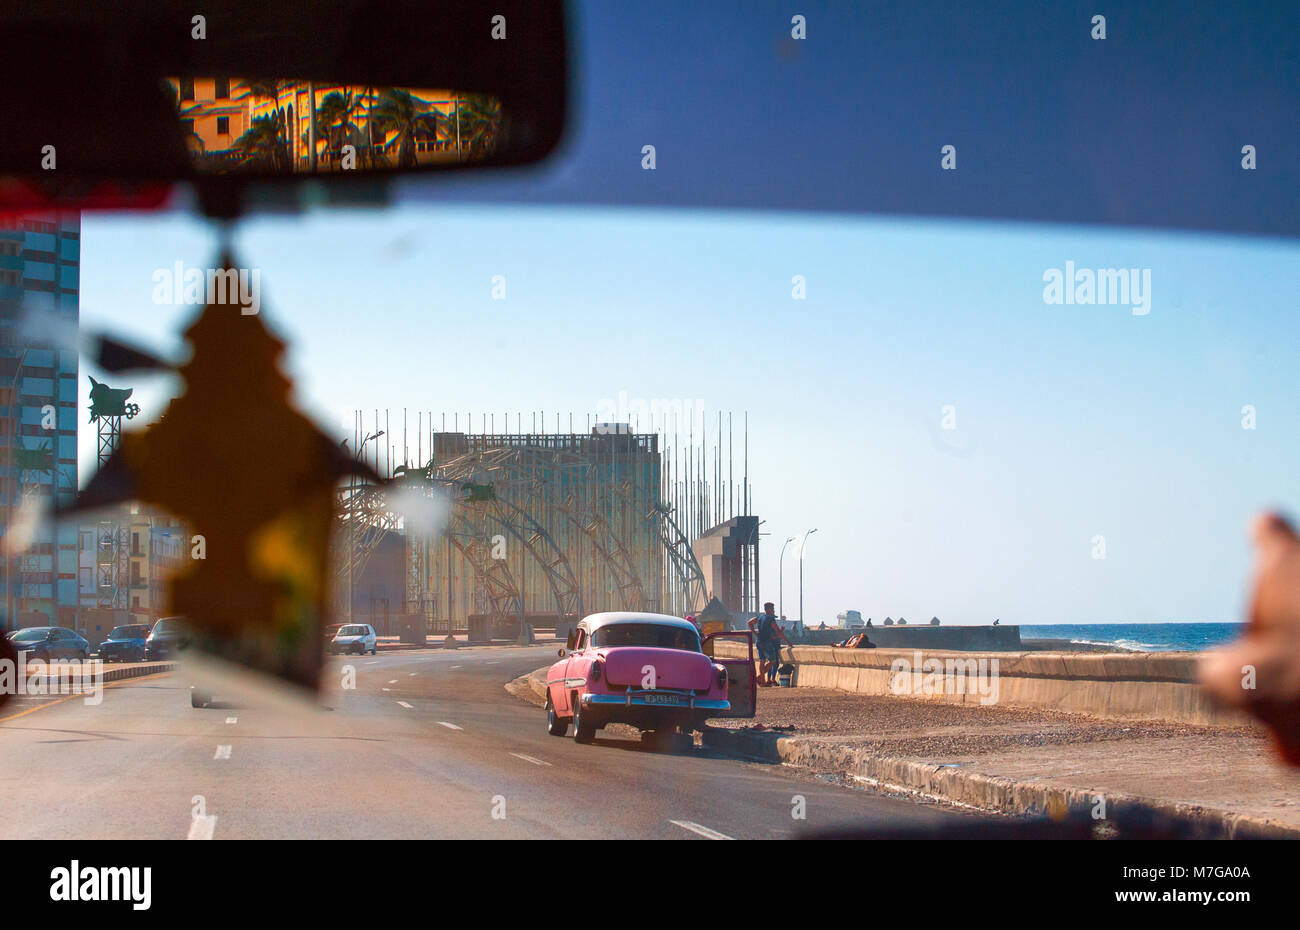 A hot pink classic car is broken down on the Malecón in Havana, Cuba.  The U.S. Embassy is in the far background. Stock Photo